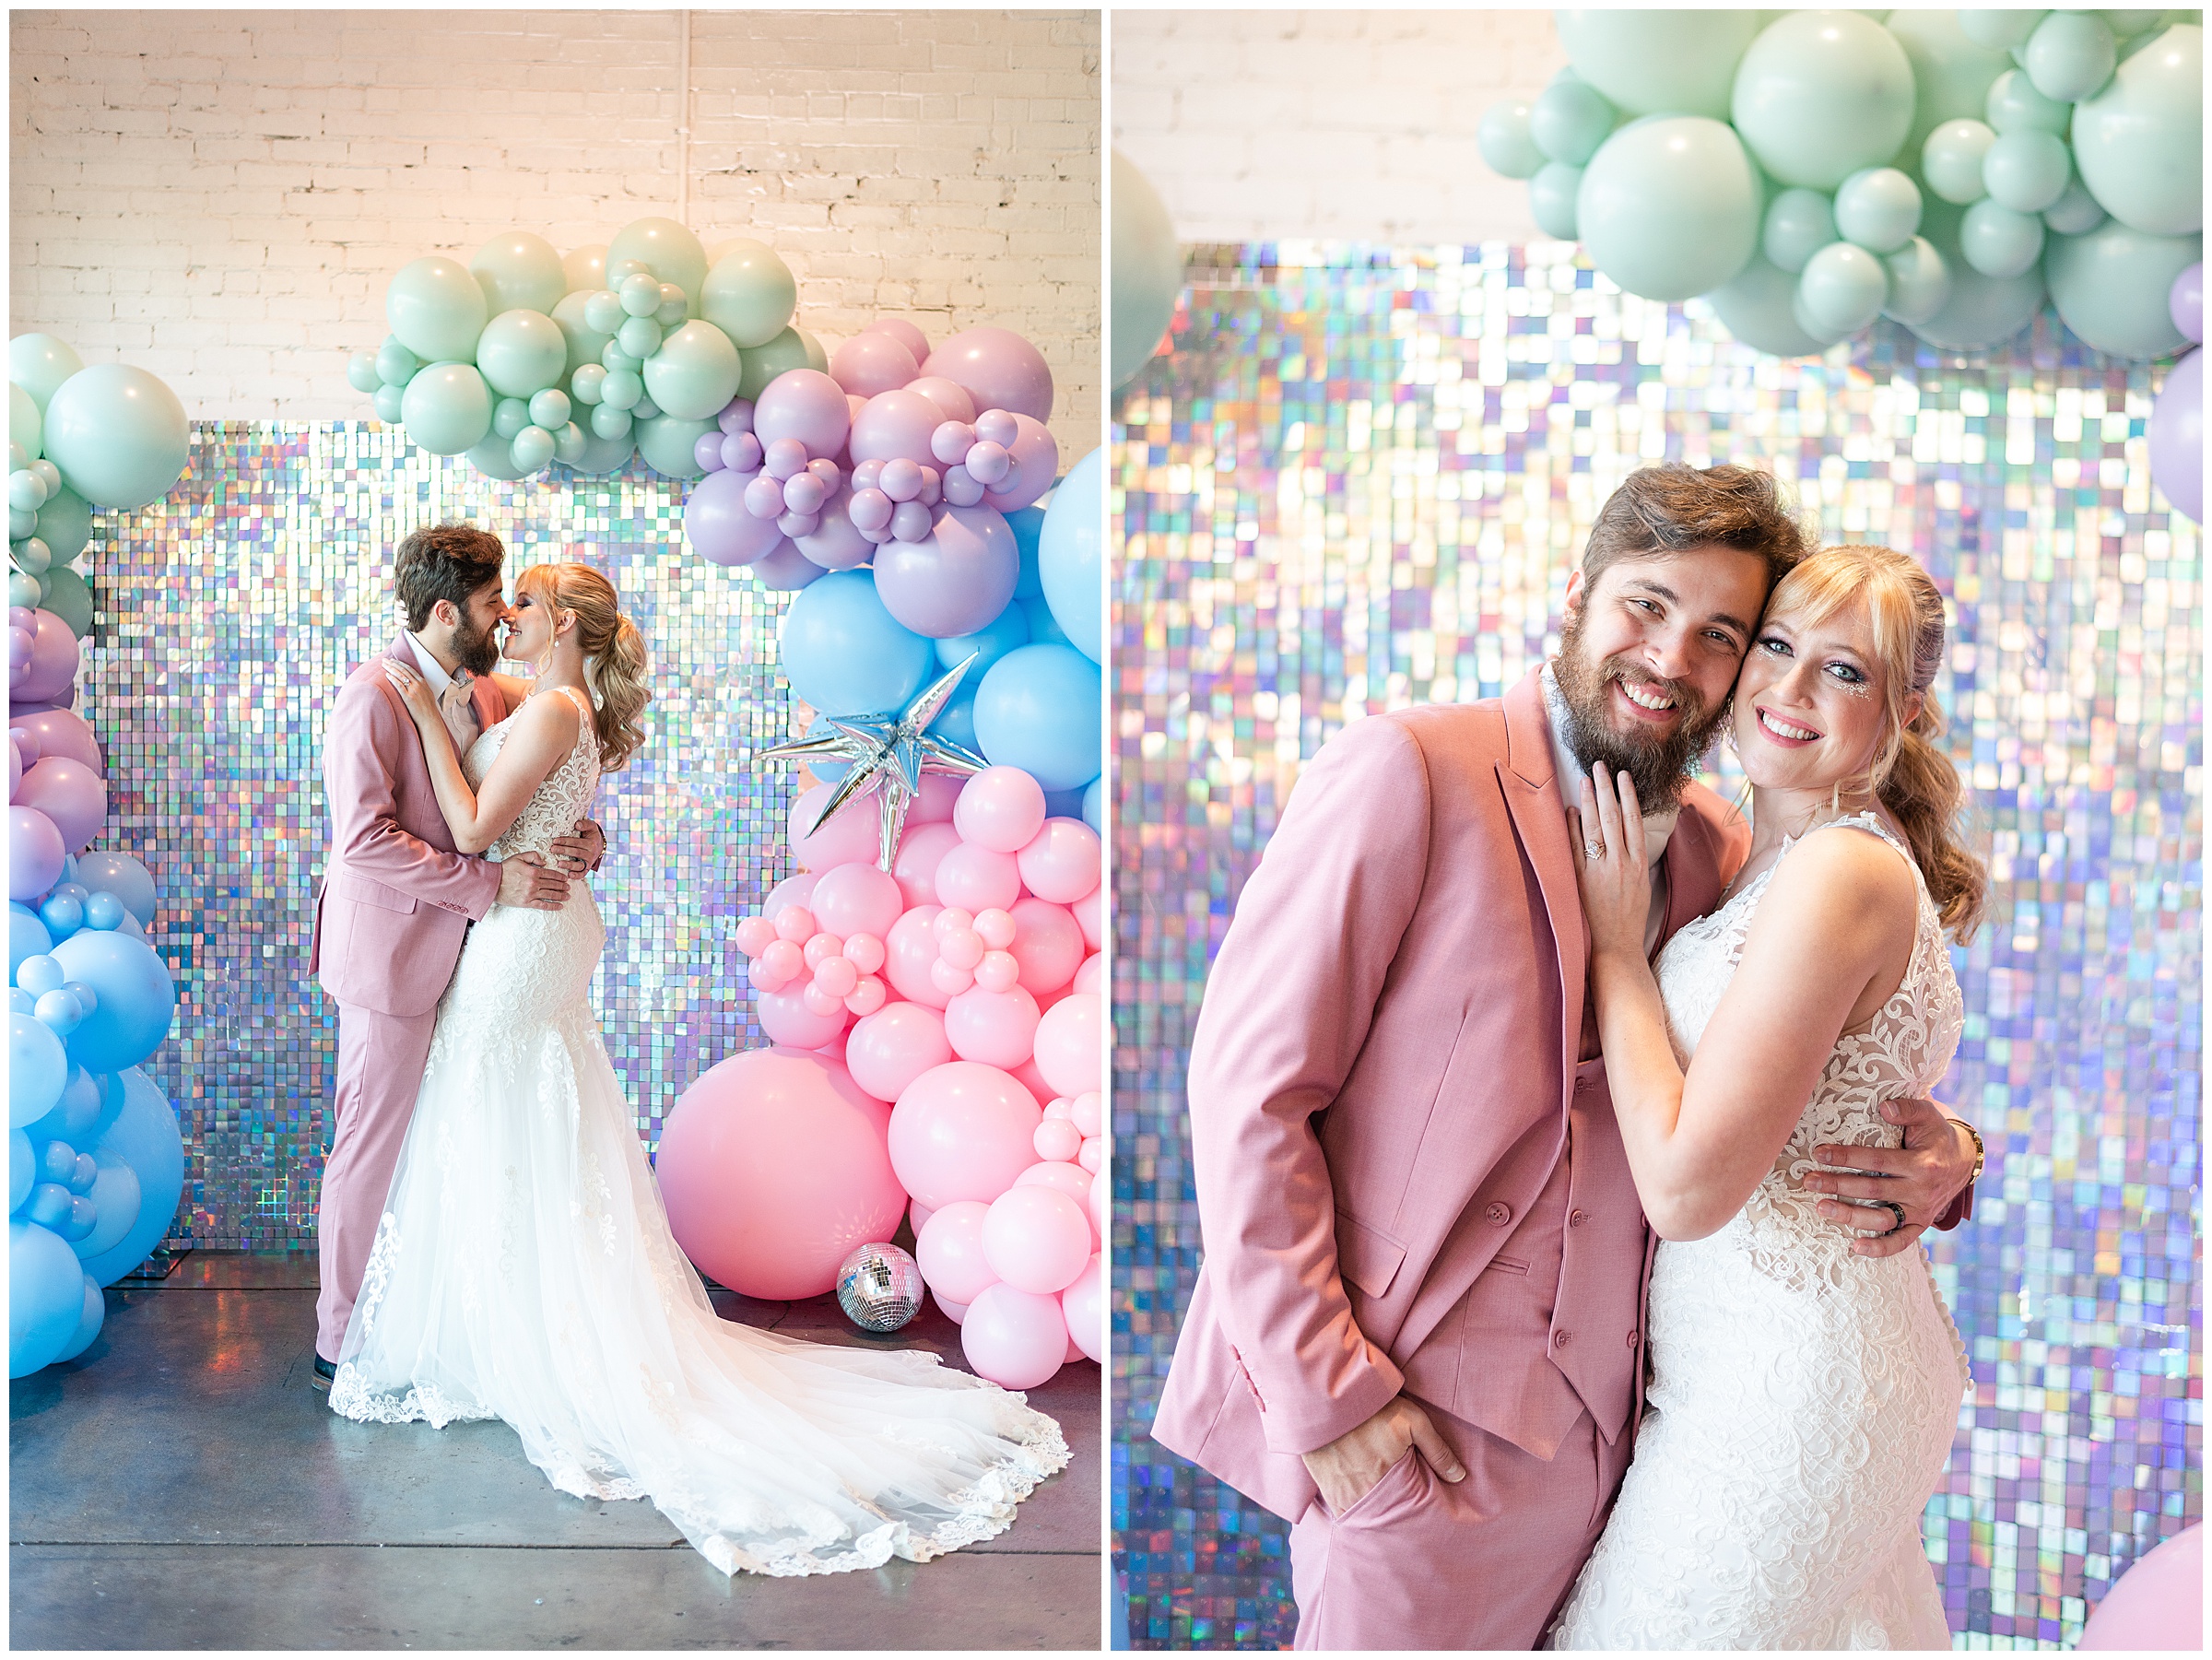 Bride and groom photos in front of  Iridescent background and pastel balloon arch at Haus 820 in Lakeland, FL